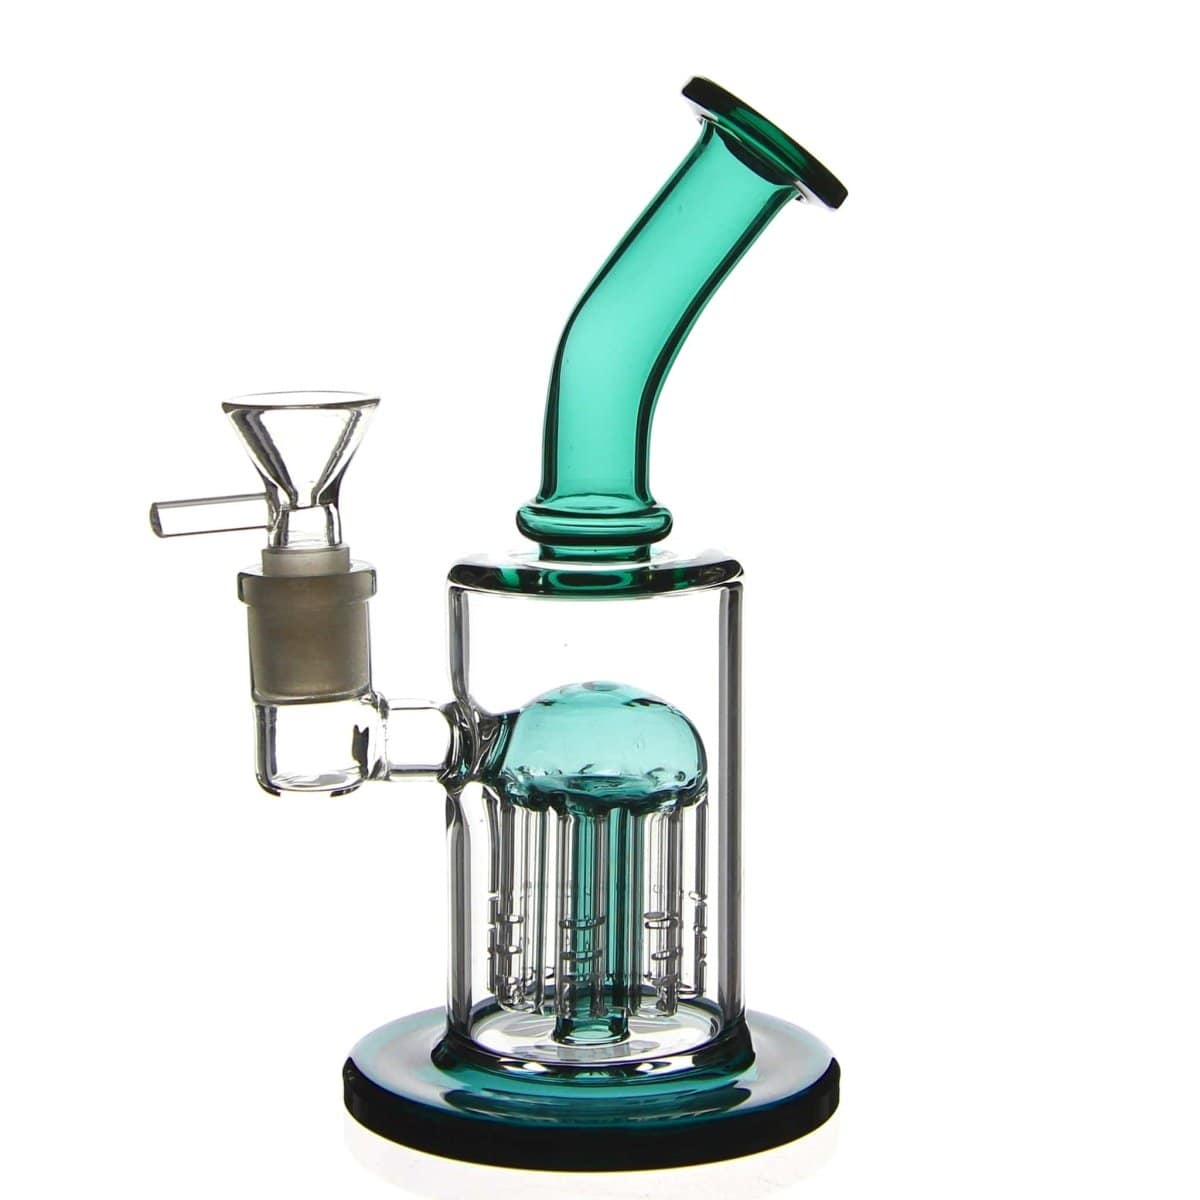 Benext Generation Glass Teal The Jammer Tree Perc Bong